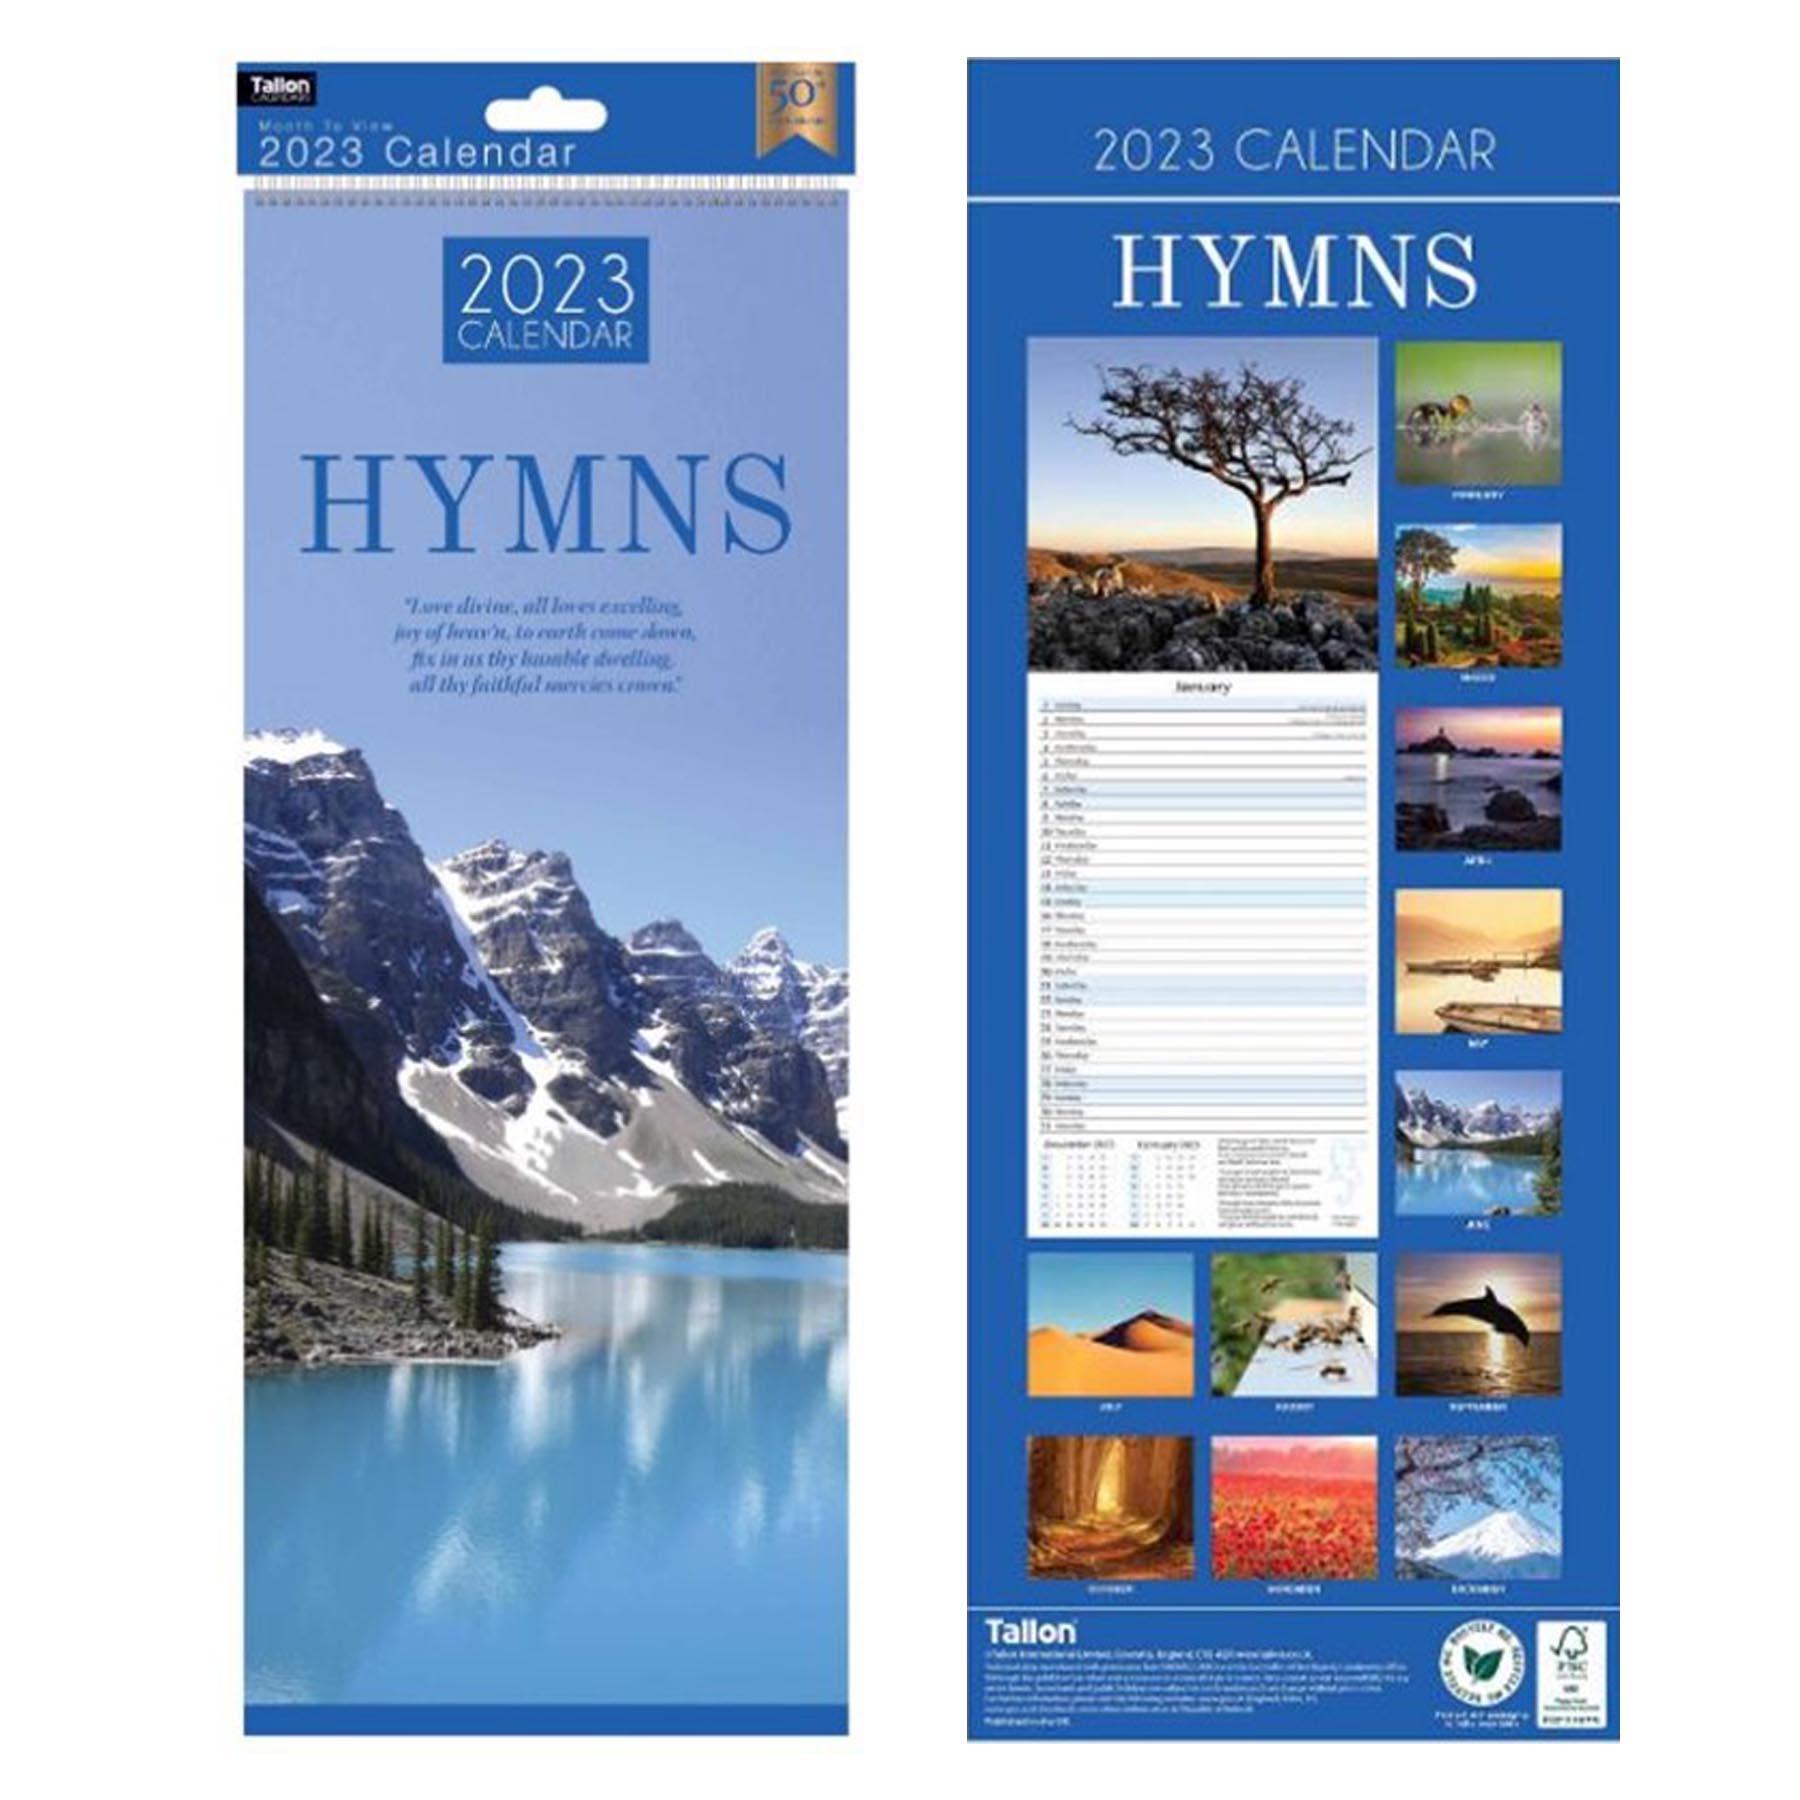 2023 Slimline Religious Wall Calendar Month to View - Hymns